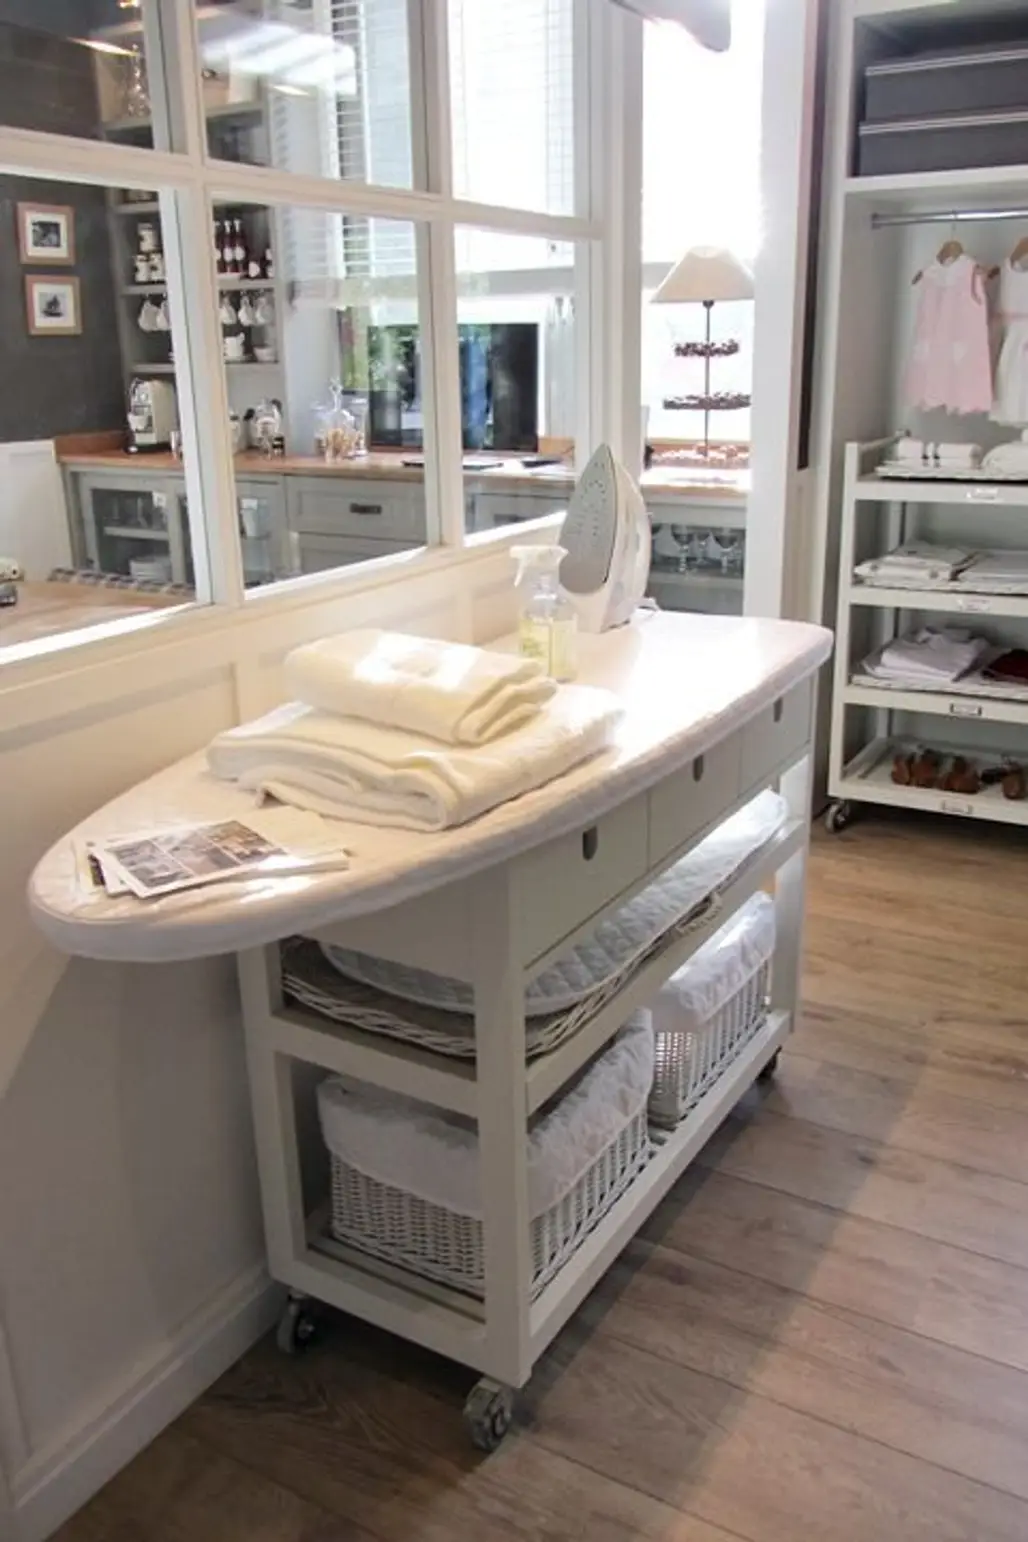 Take a Kitchen Island and Attach an Ironing Board